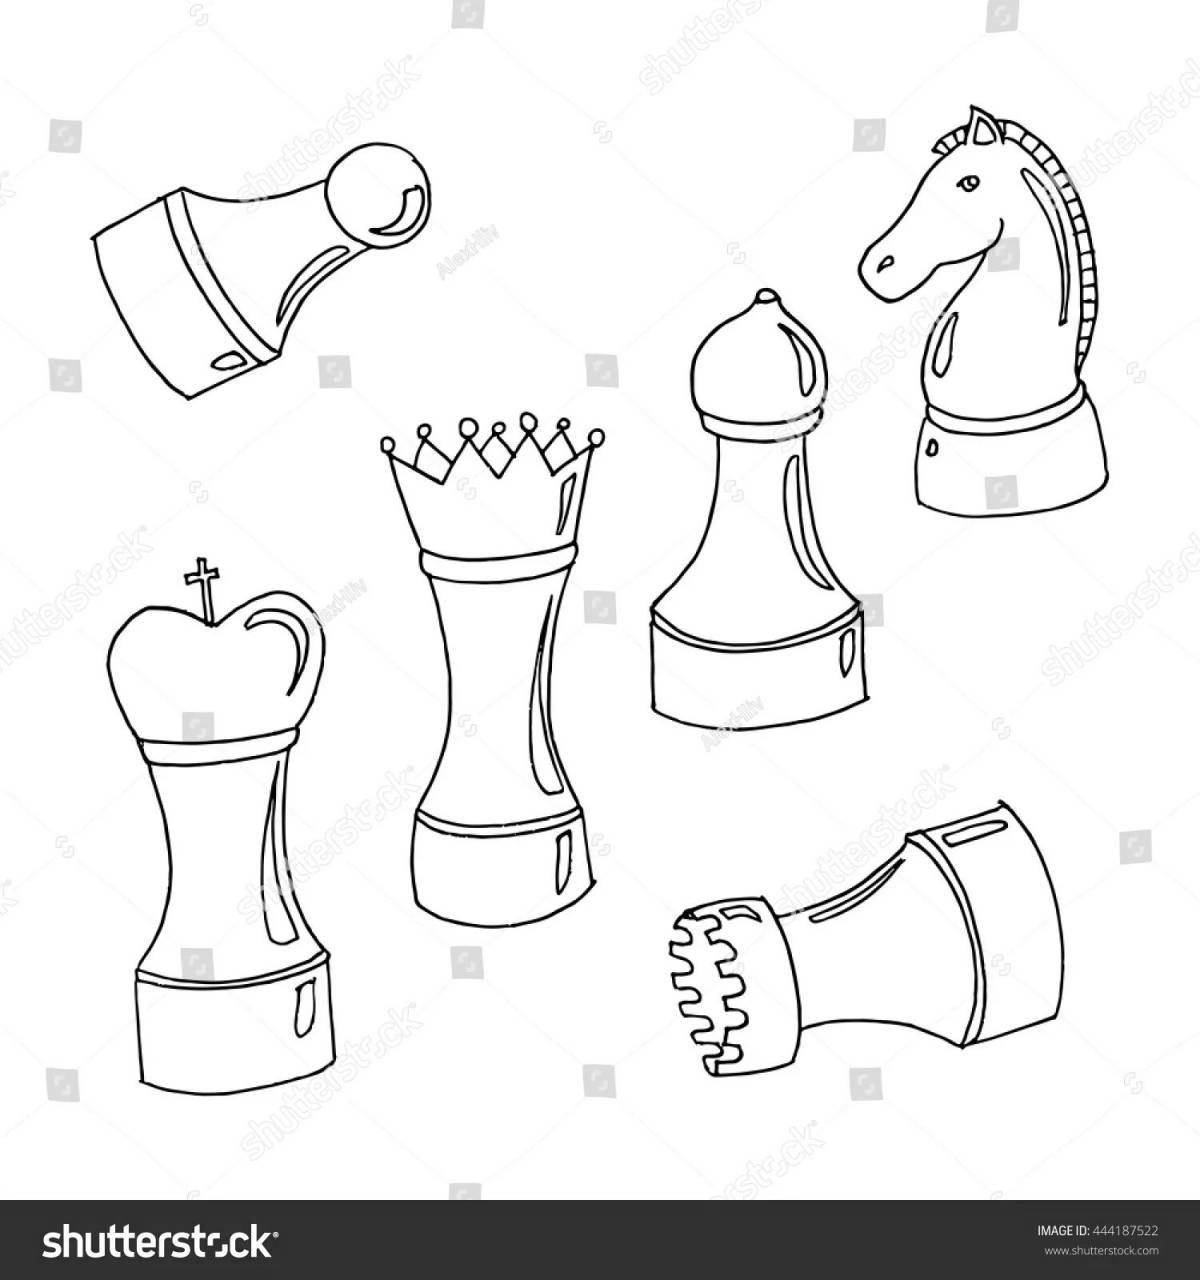 Playful chess pieces coloring page for kids